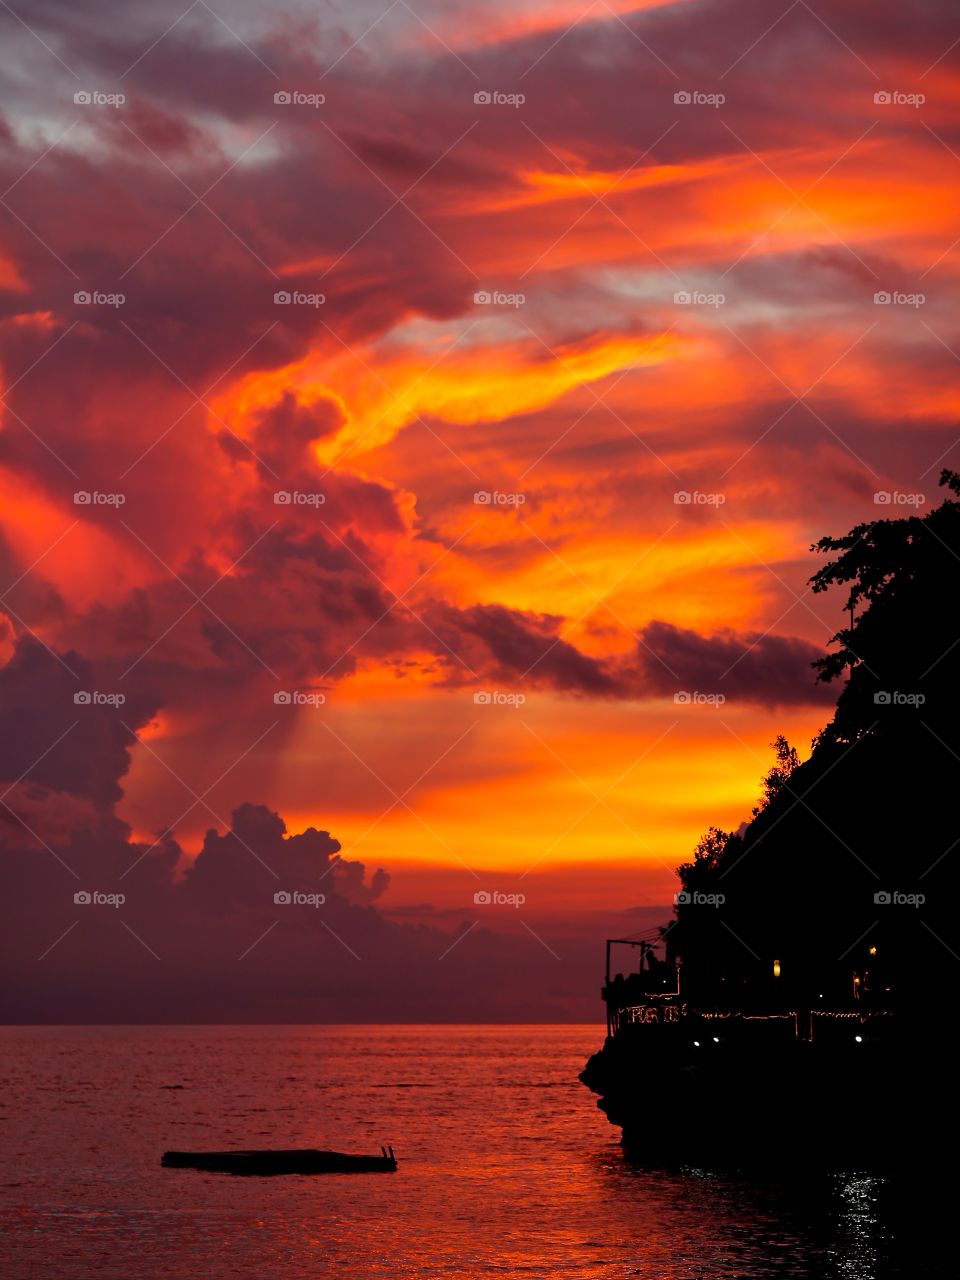 Wildfire in the sky. Amazing sunset in Boracay island, Philippines. 